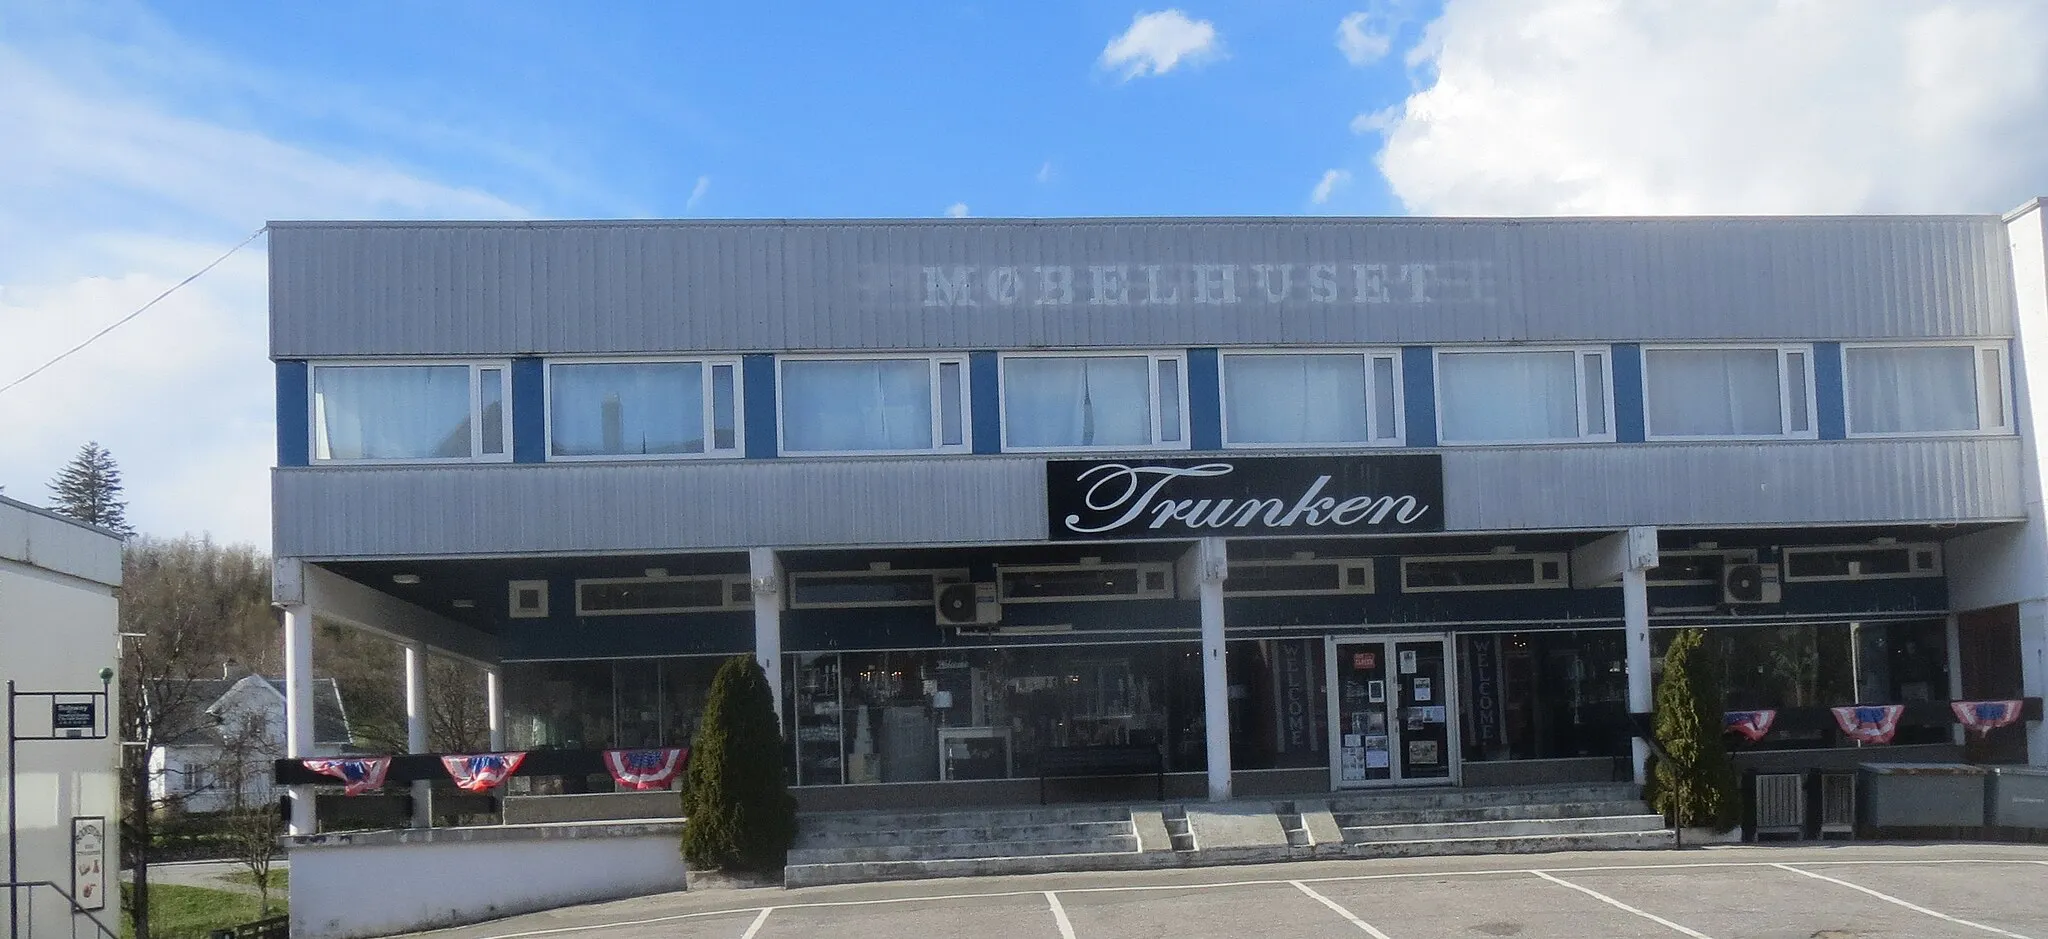 Photo showing: Trunken (The Trunk) a store in Vanse, Norway